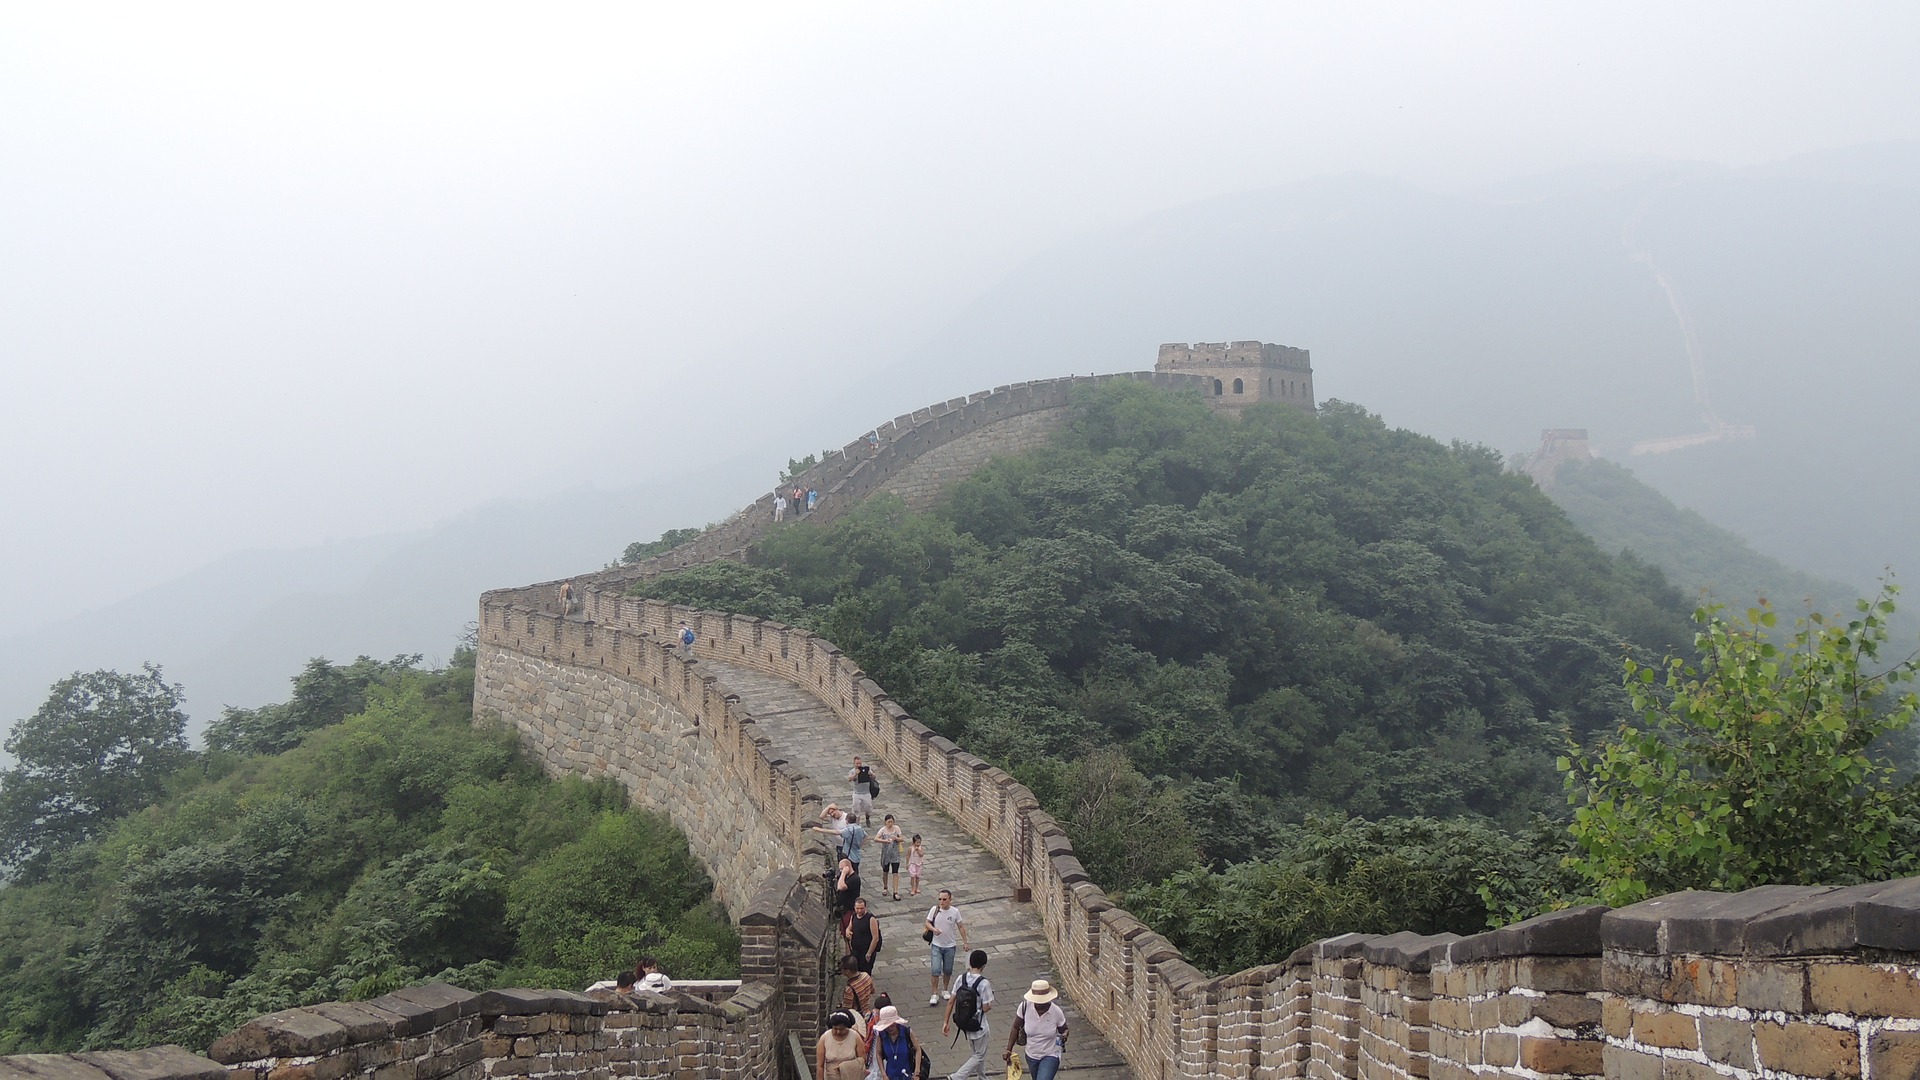 Great Wall of China Image by Andy Leung